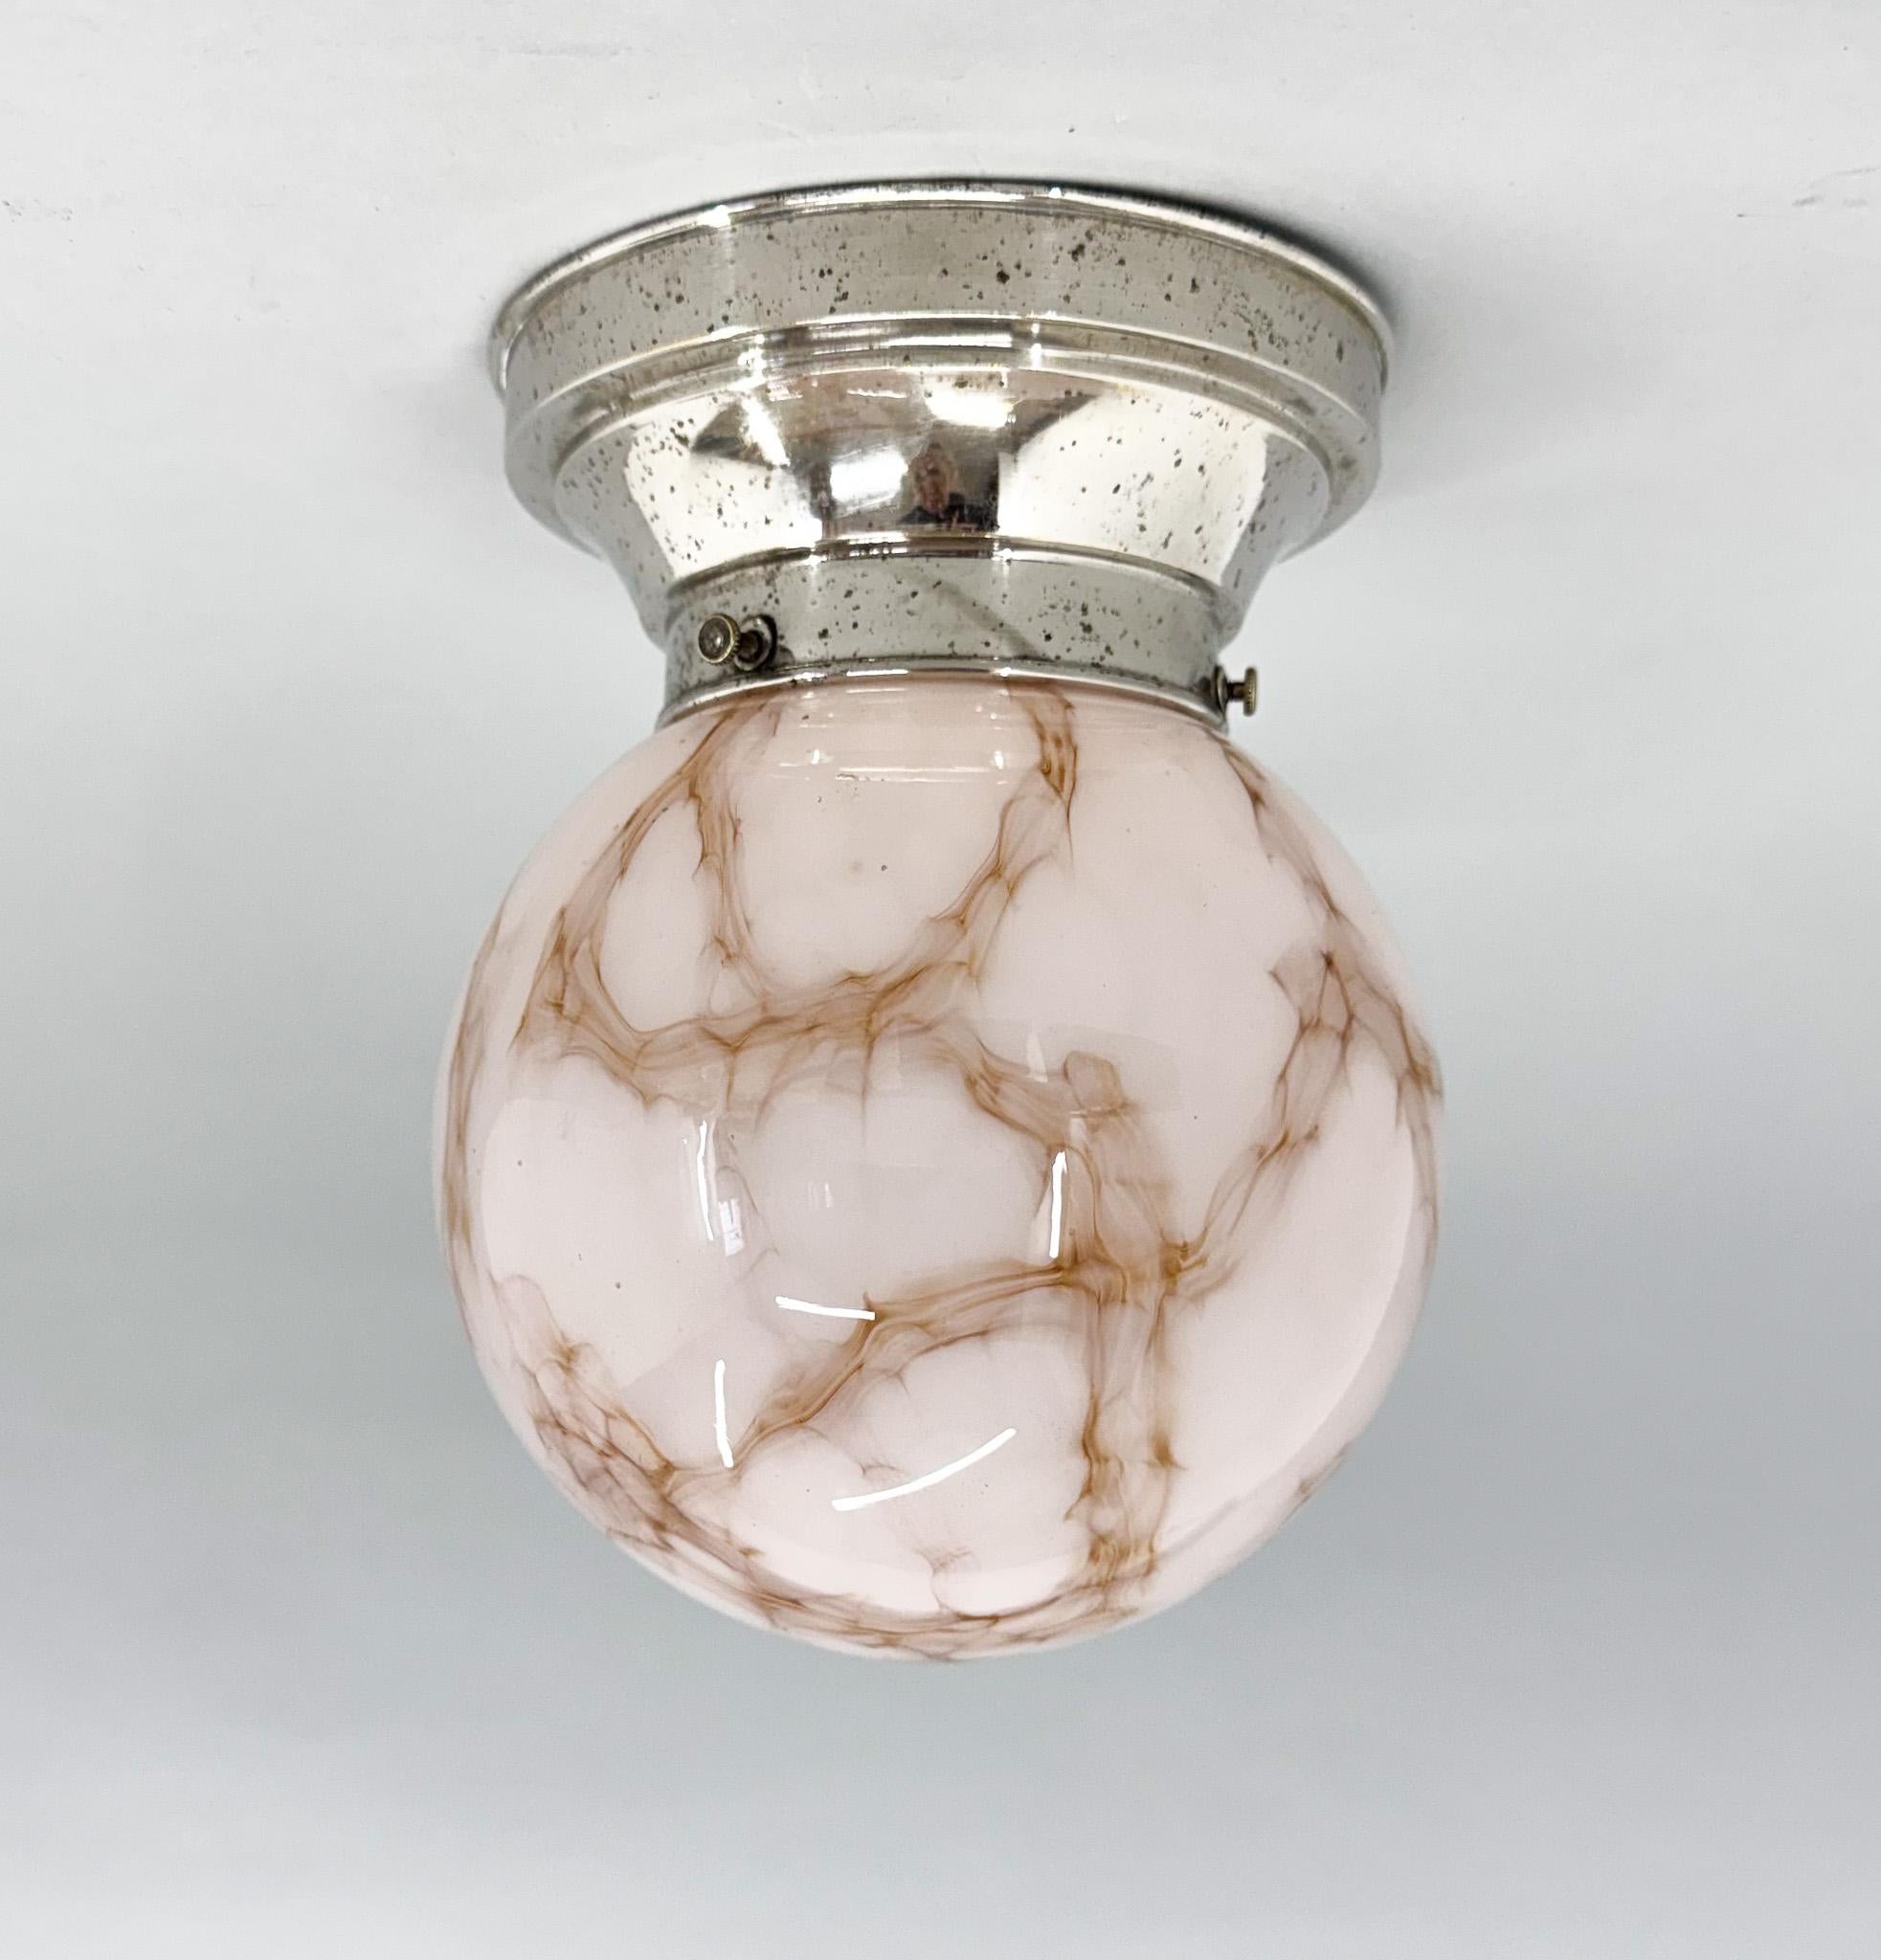 Art Deco ceiling lamp with chrome-plated metal base and beautiful marble glass shade. The chrome part shows some signs of wear and tear from time, but otherwise the lamp is in good condition. New wiring. Compatible with American cable. New wiring.